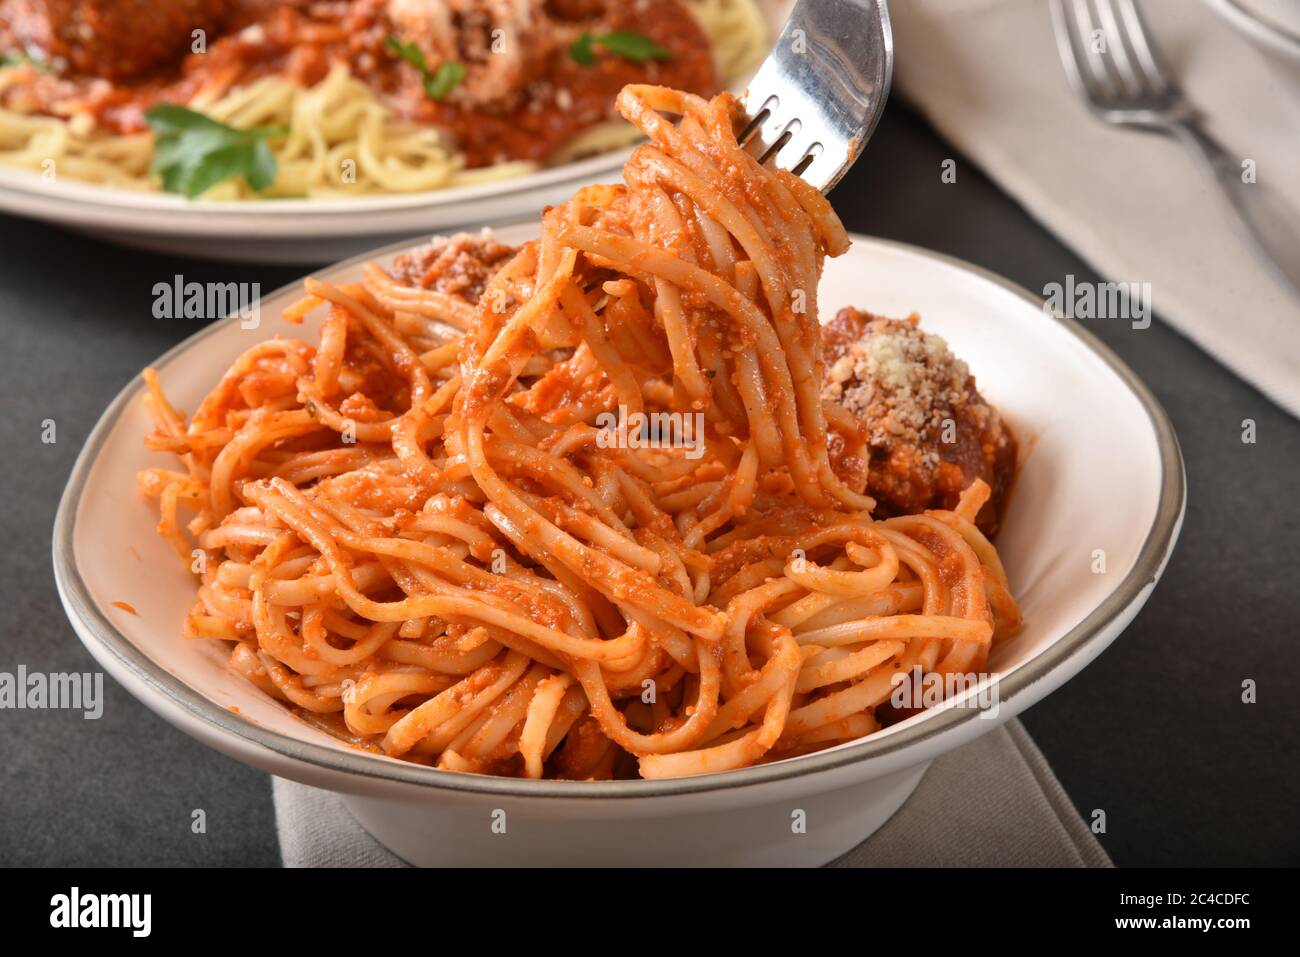 Taking a bite of gourmet spaghetti and meatballs Stock Photo